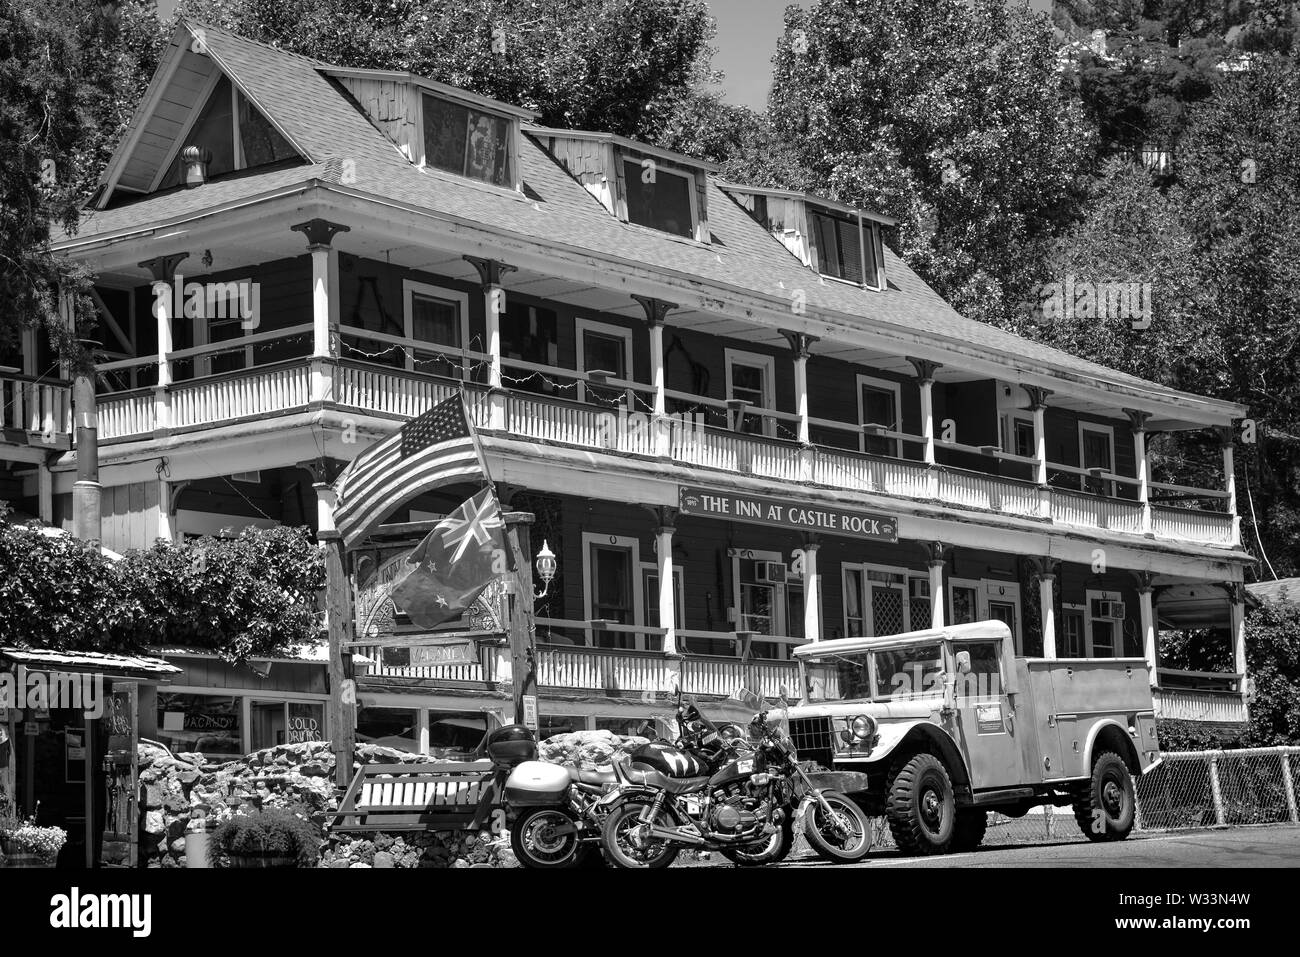 the Inn at Castle Rock on Tombstone canyon Road is an eclectic, colorful vintage hotel built as a boarding house in 1895, in Bisbee, AZ, USA Stock Photo